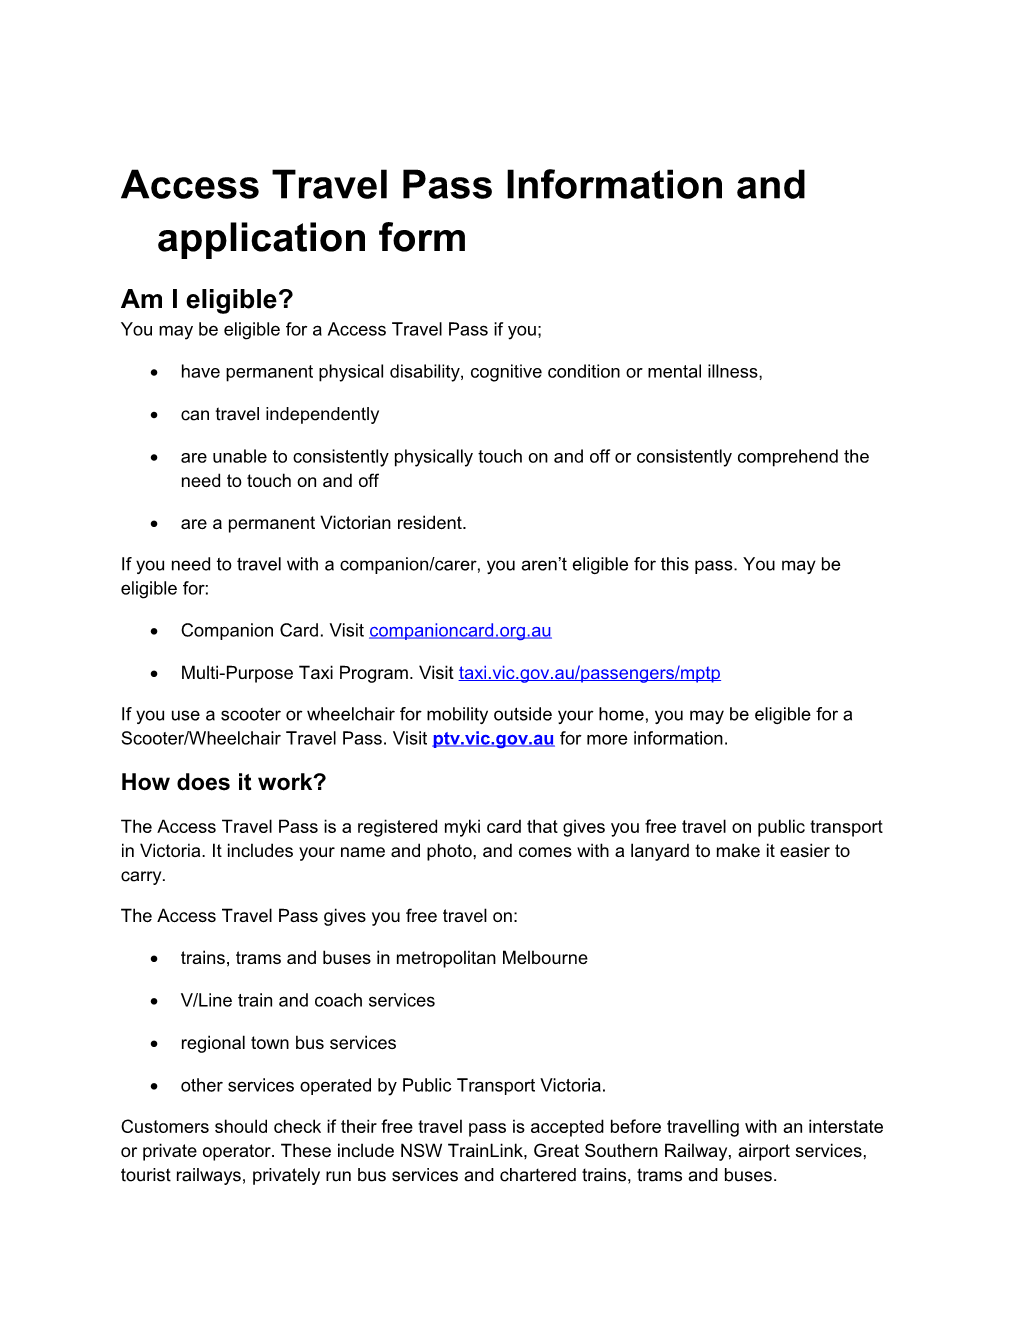 Access Travel Passinformation and Application Form